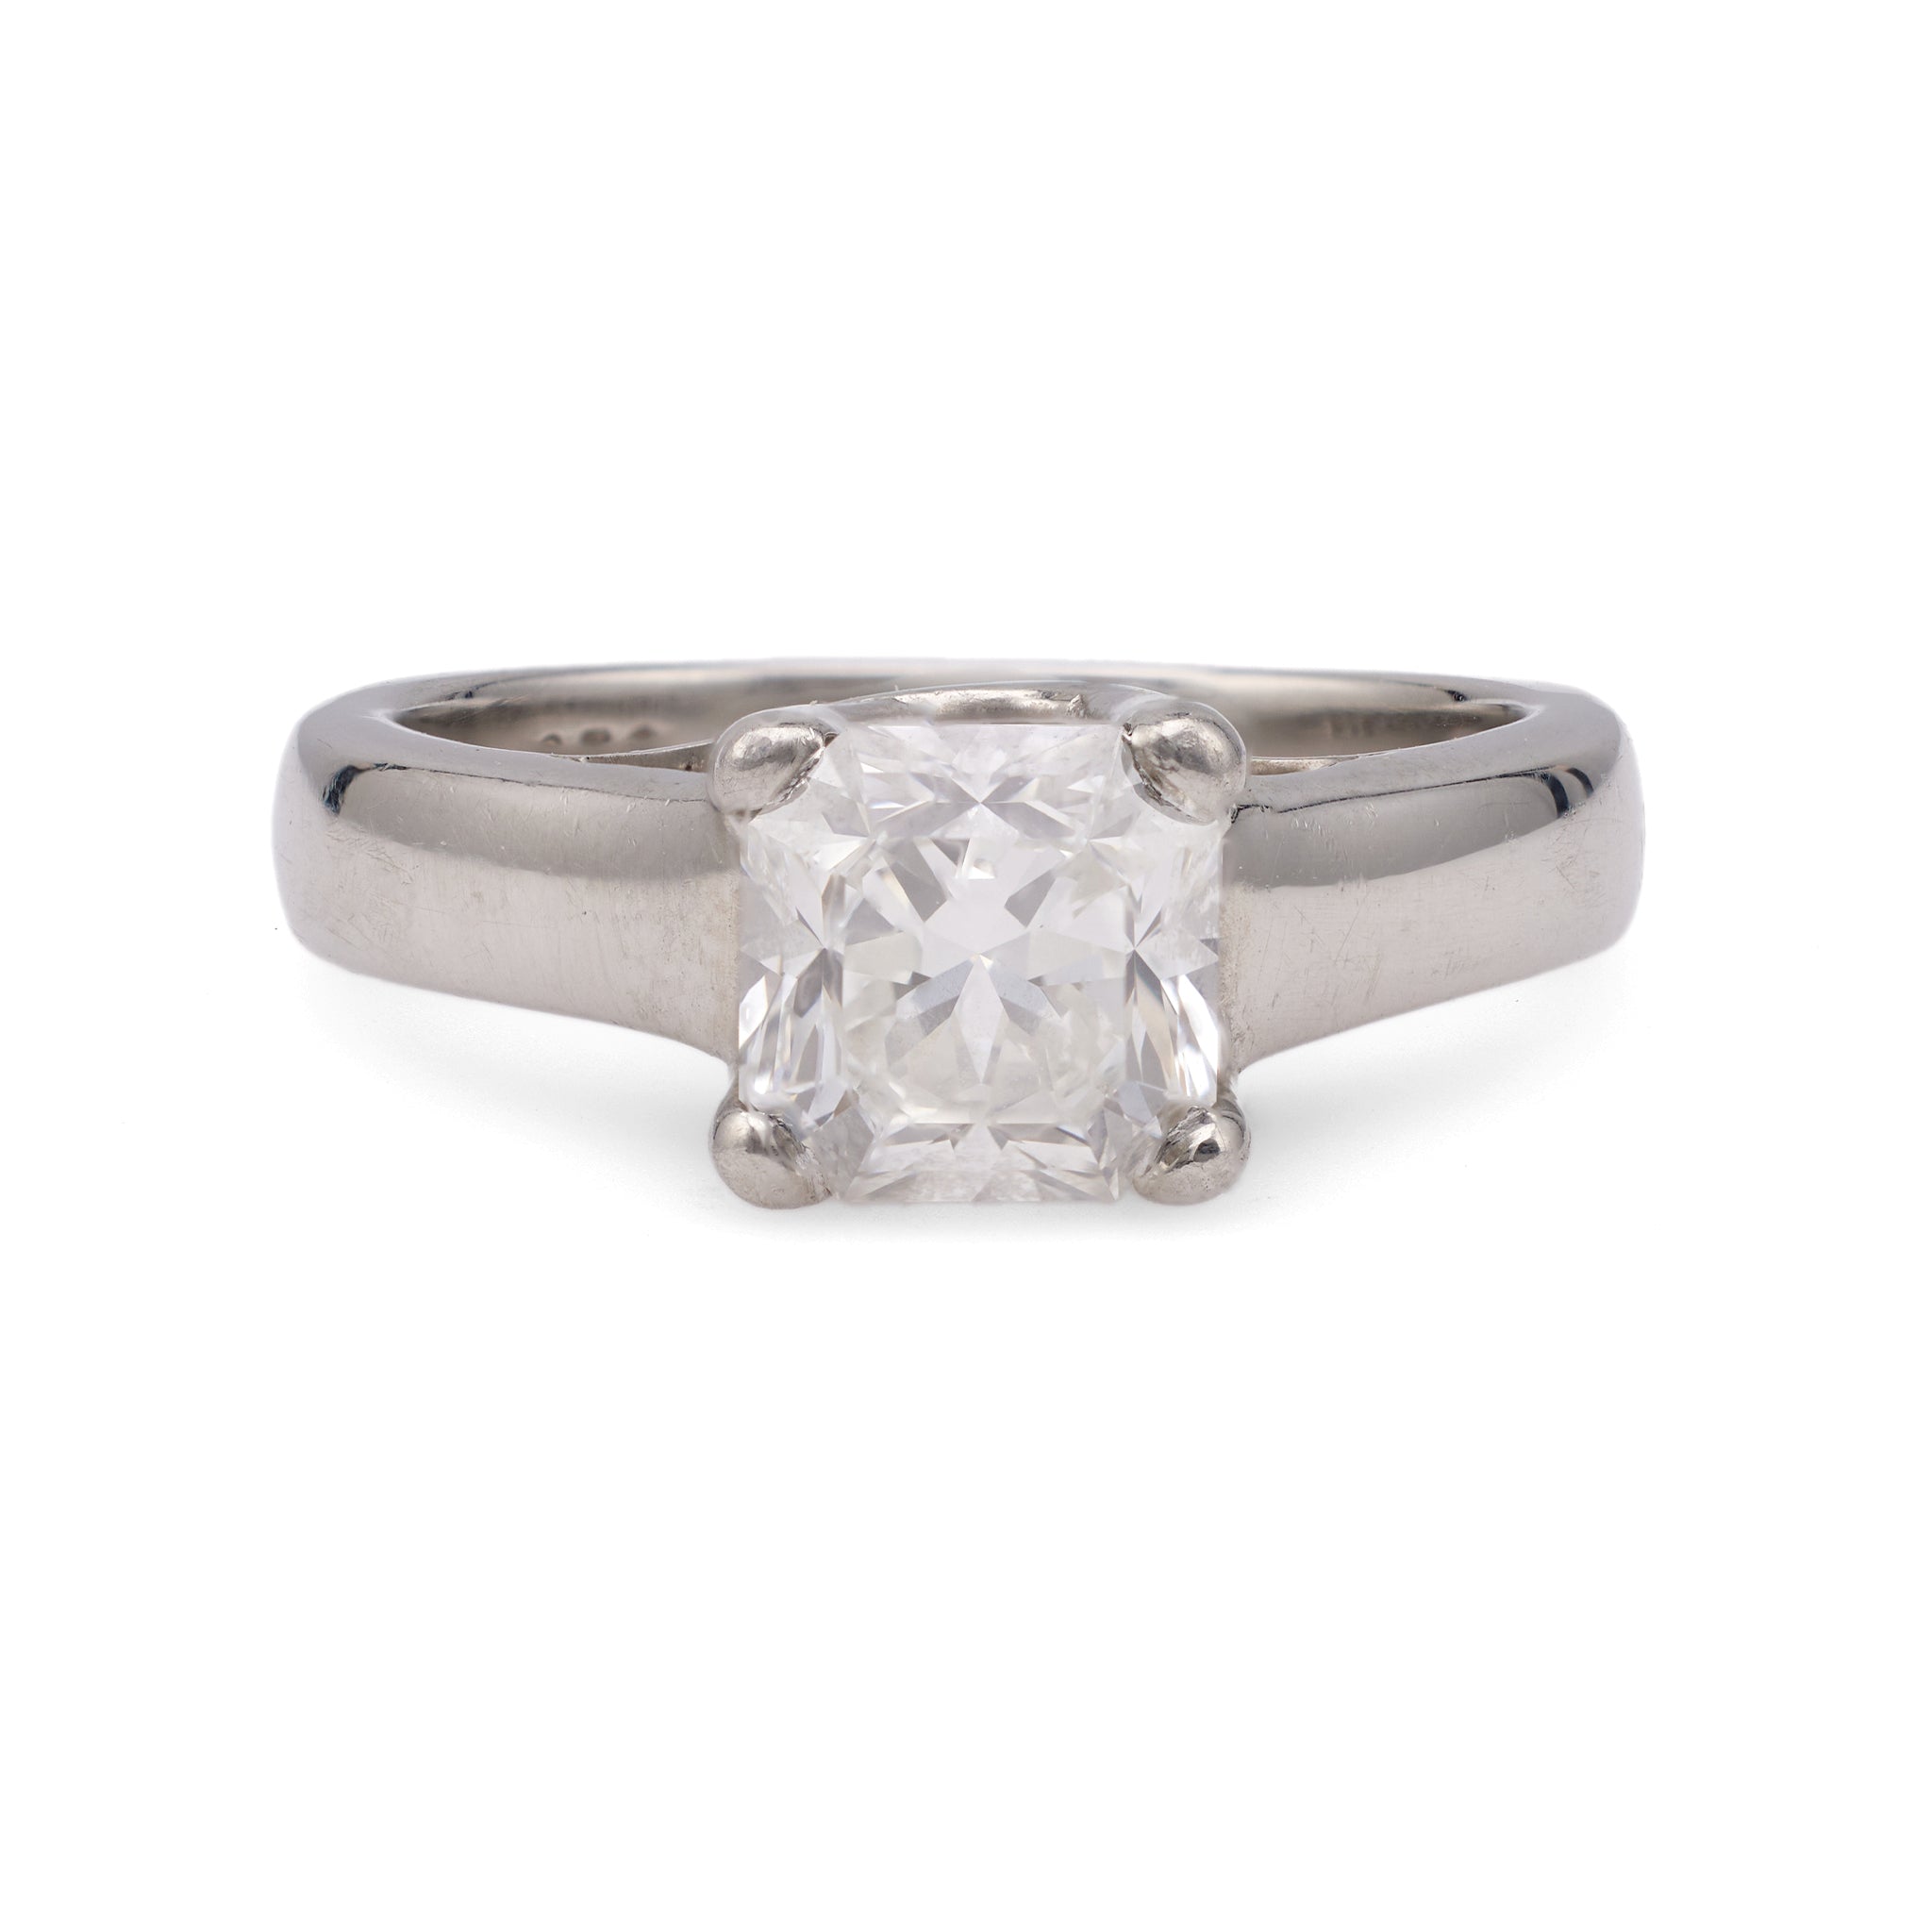 Vintage GIA 1.30 Carat Square Cut Diamond Platinum Solitaire Ring Rings Jack Weir & Sons   